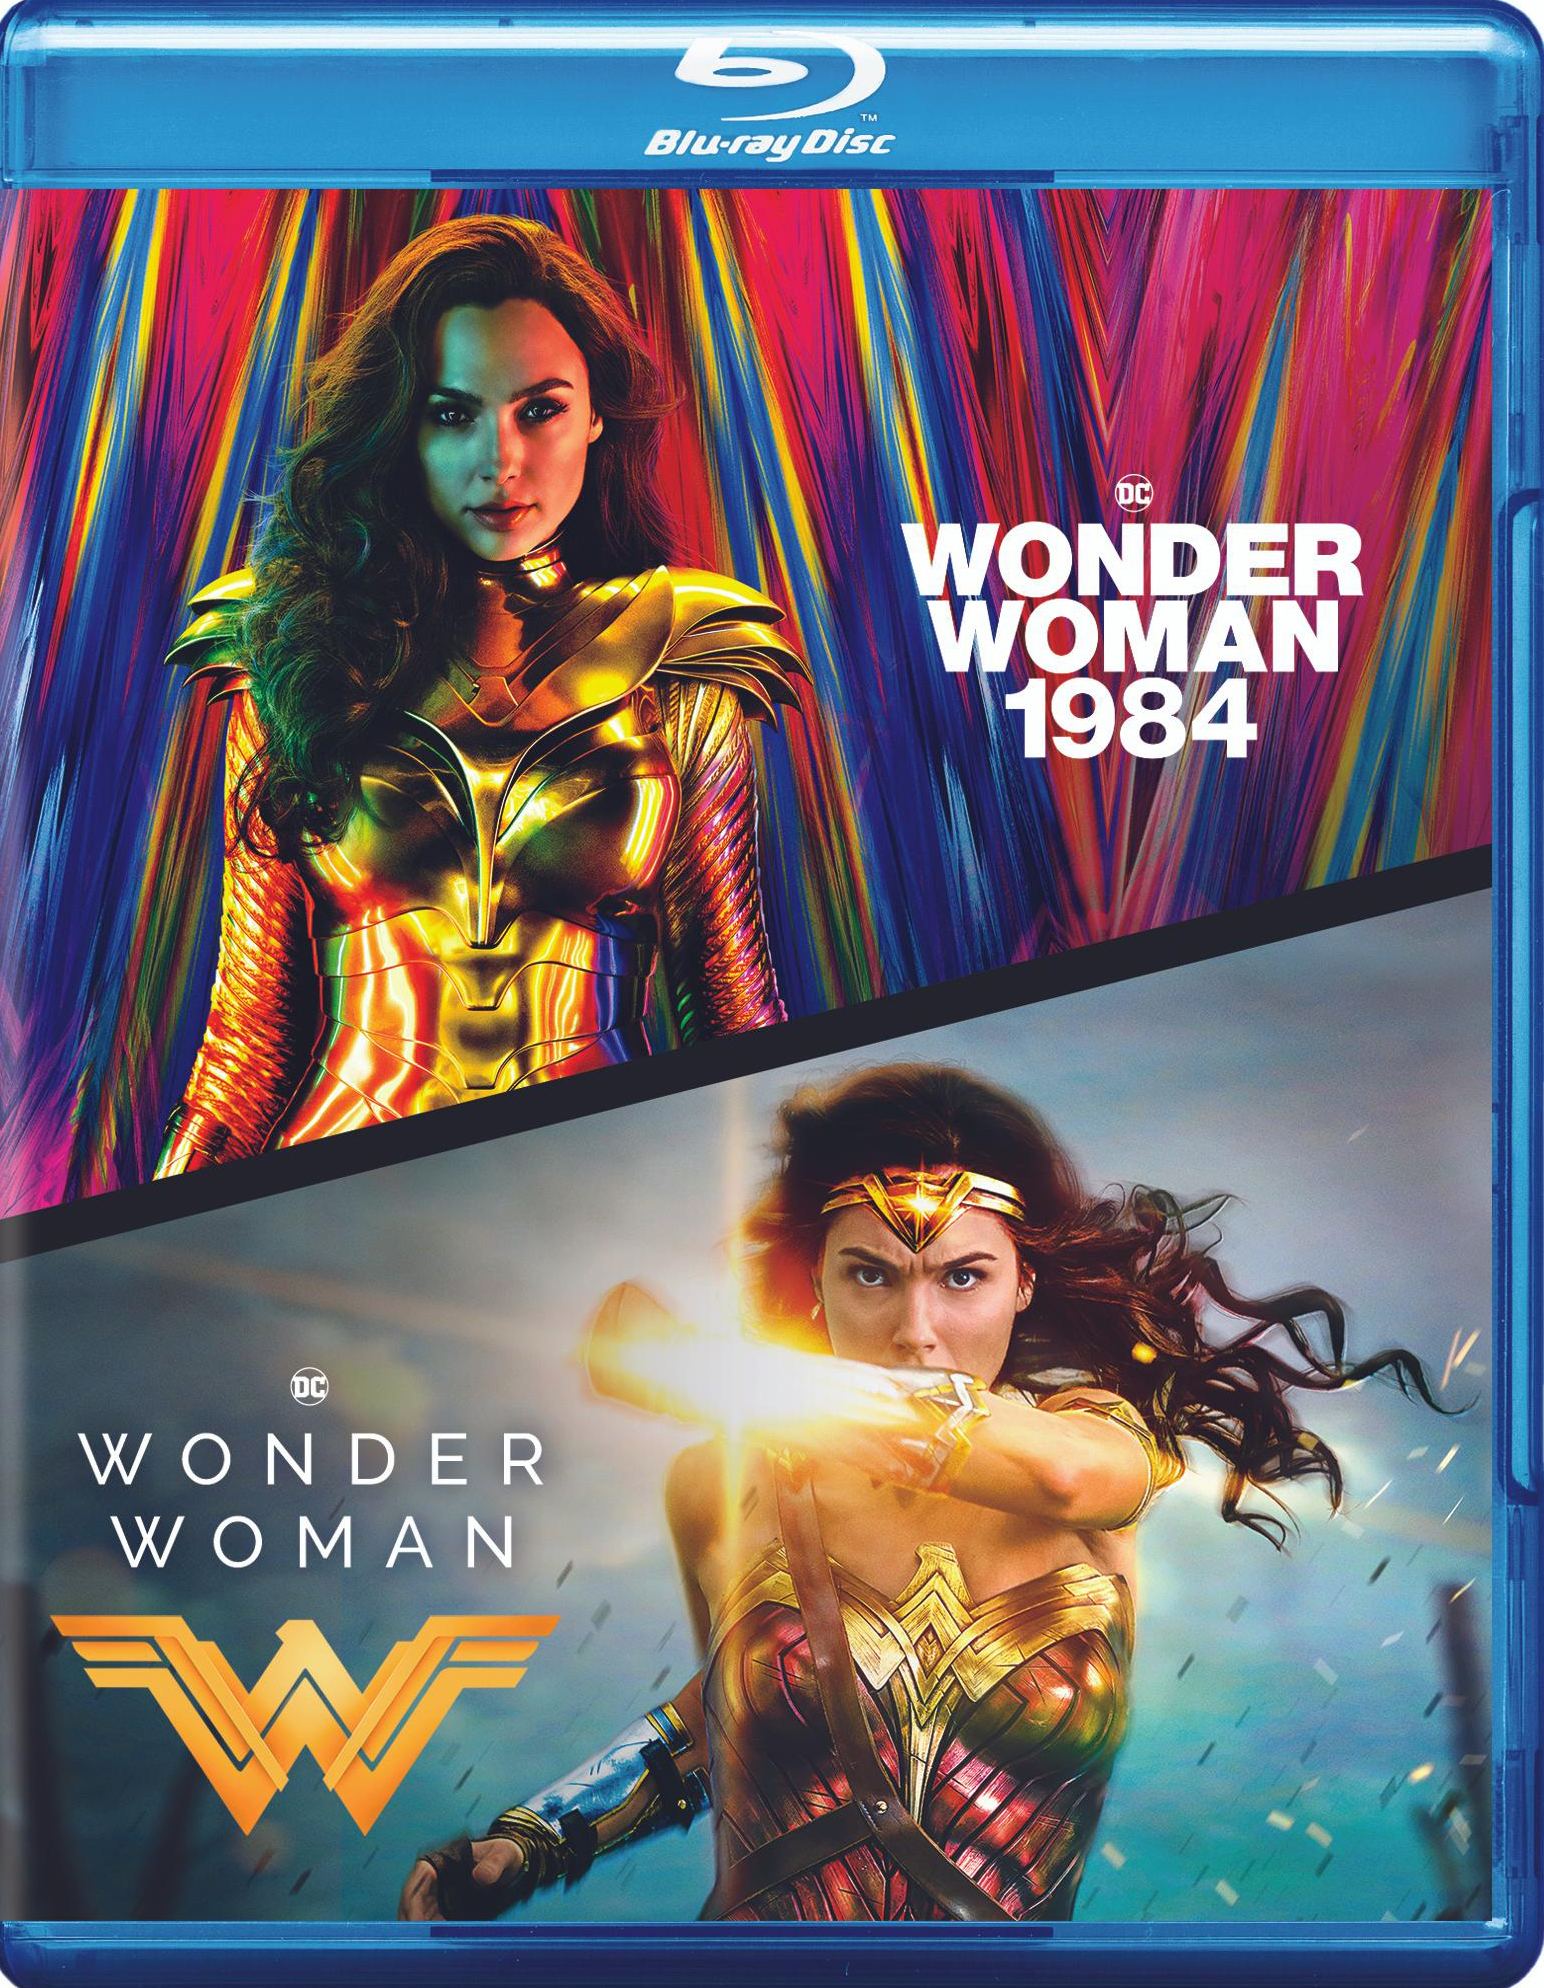 15 New Images from Wonder Woman 1984 from Recently Released Books